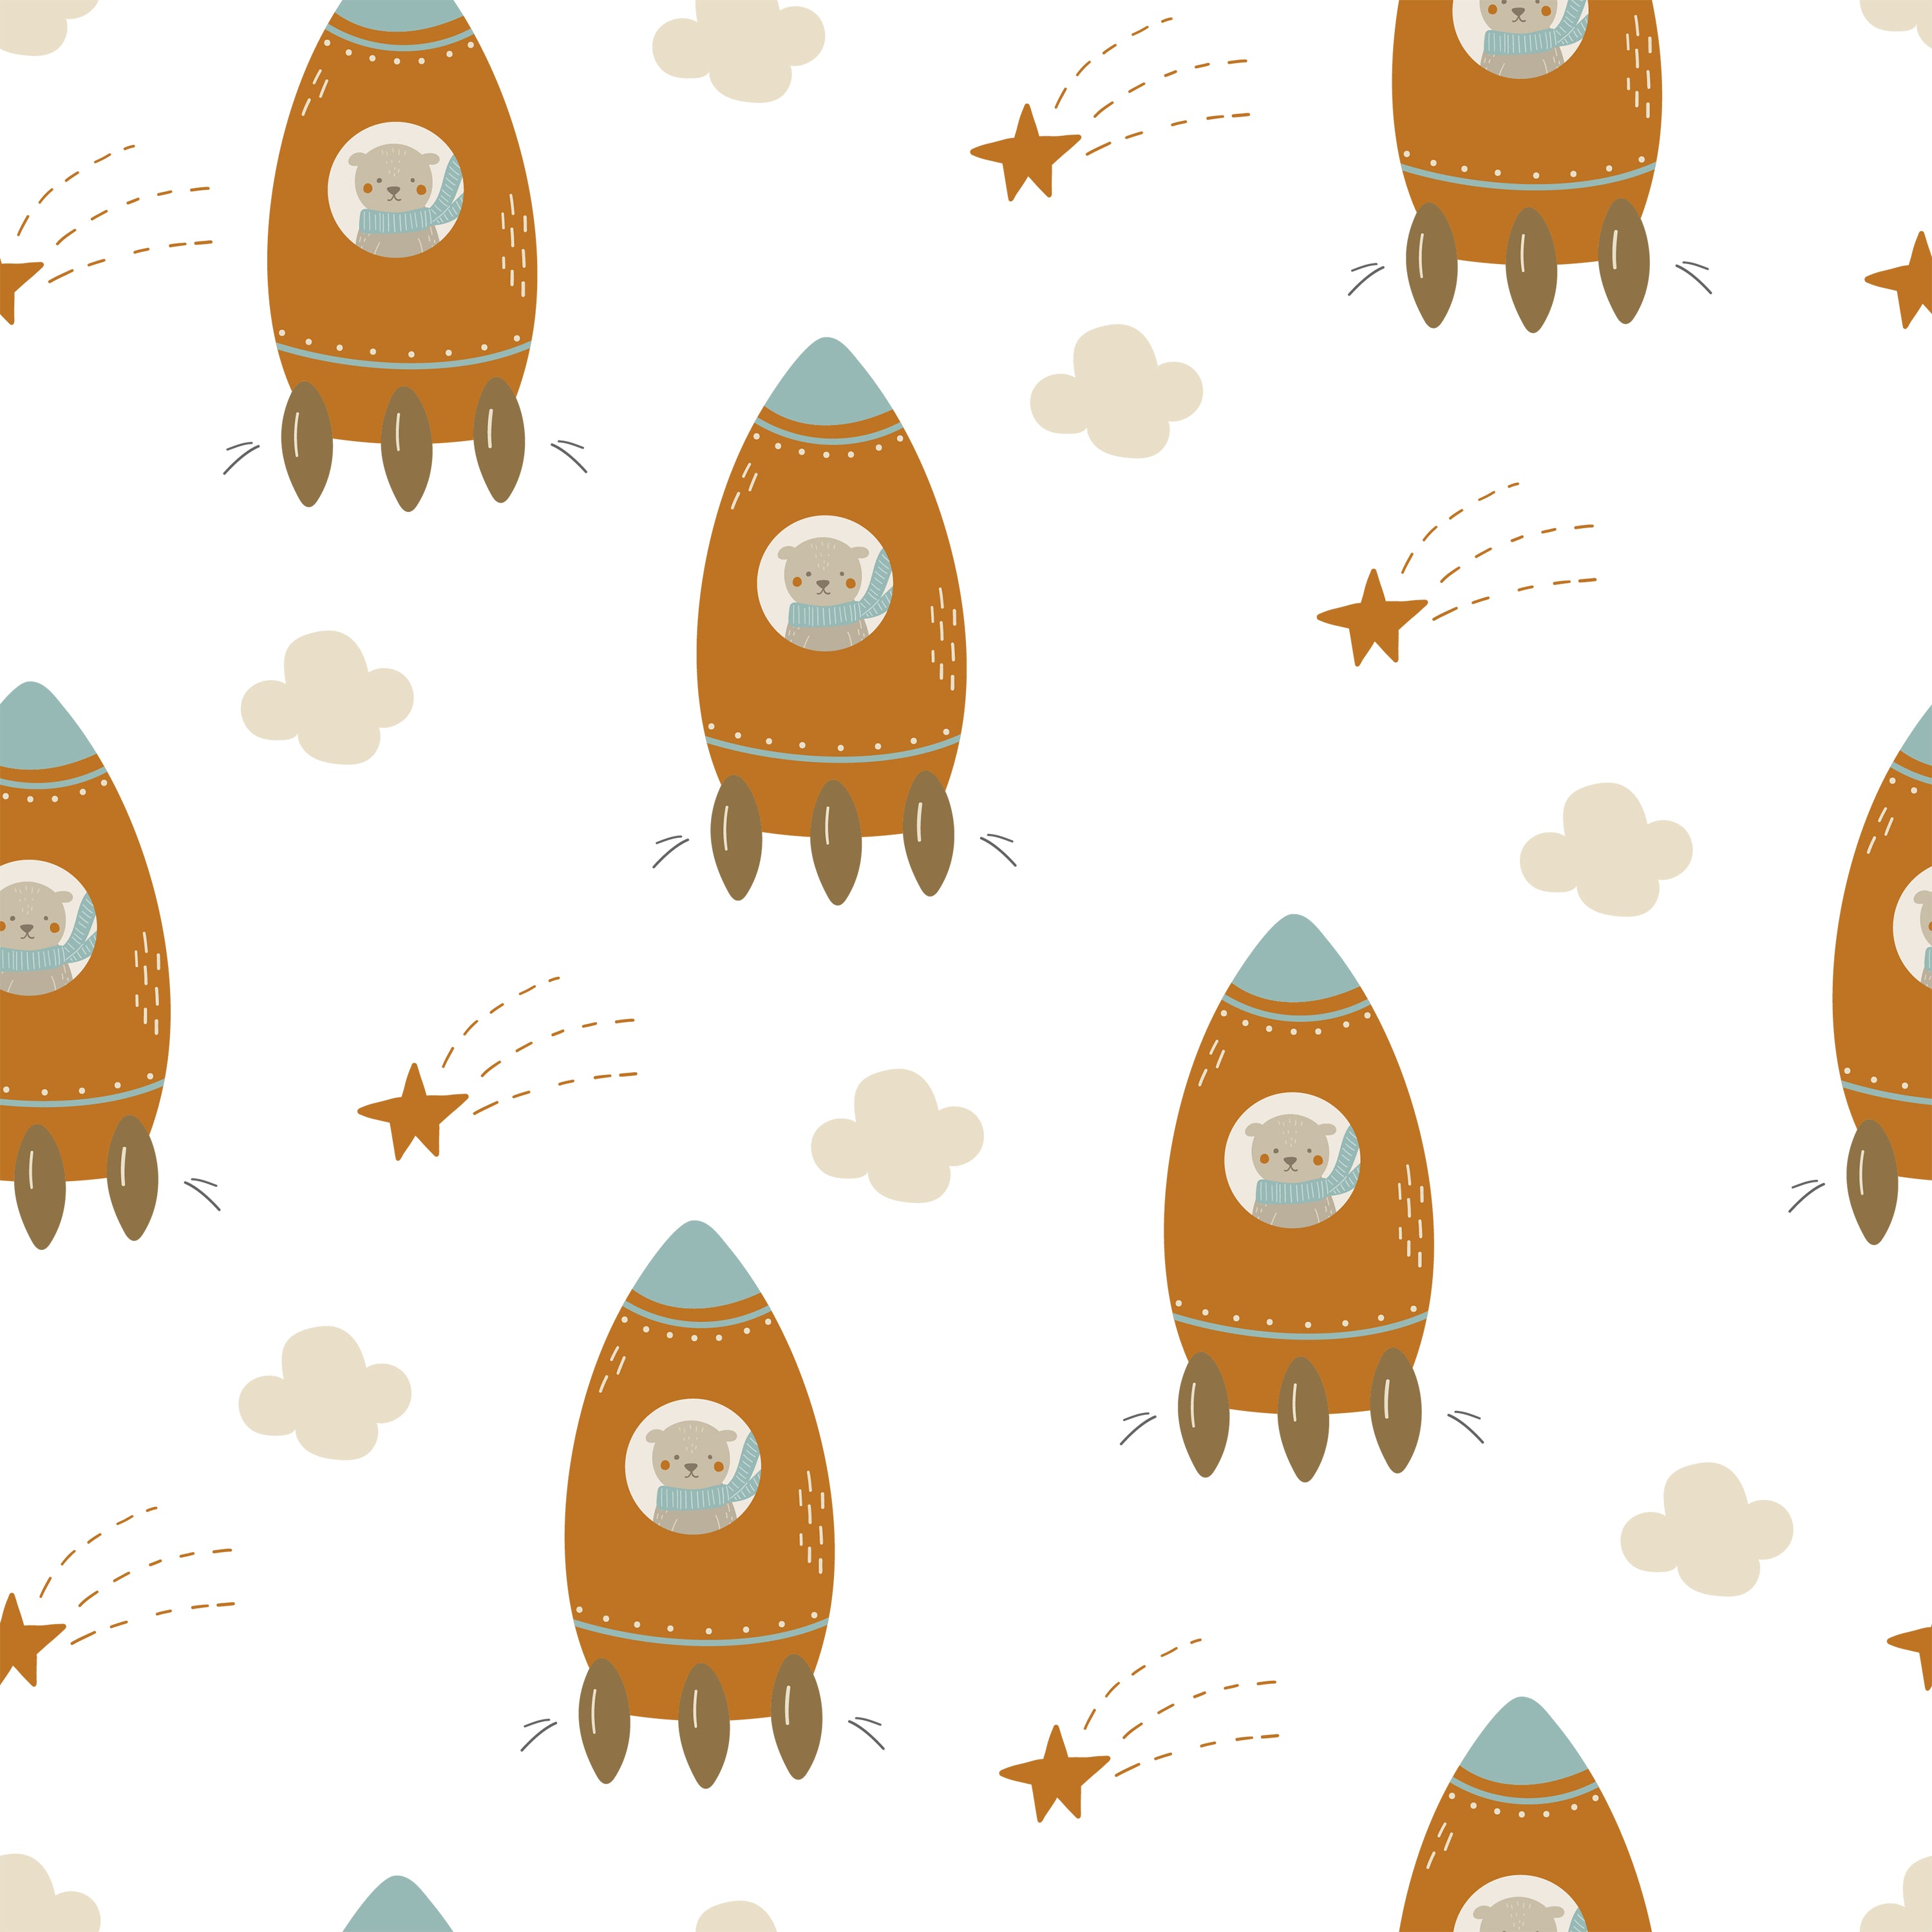 Detailed close-up of the Rocket Time Wallpaper featuring an adorable teddy bear astronaut inside an orange rocket, with a soft blue nose cone and small details like rivets and stripes, set against a white backdrop with clouds and star motifs